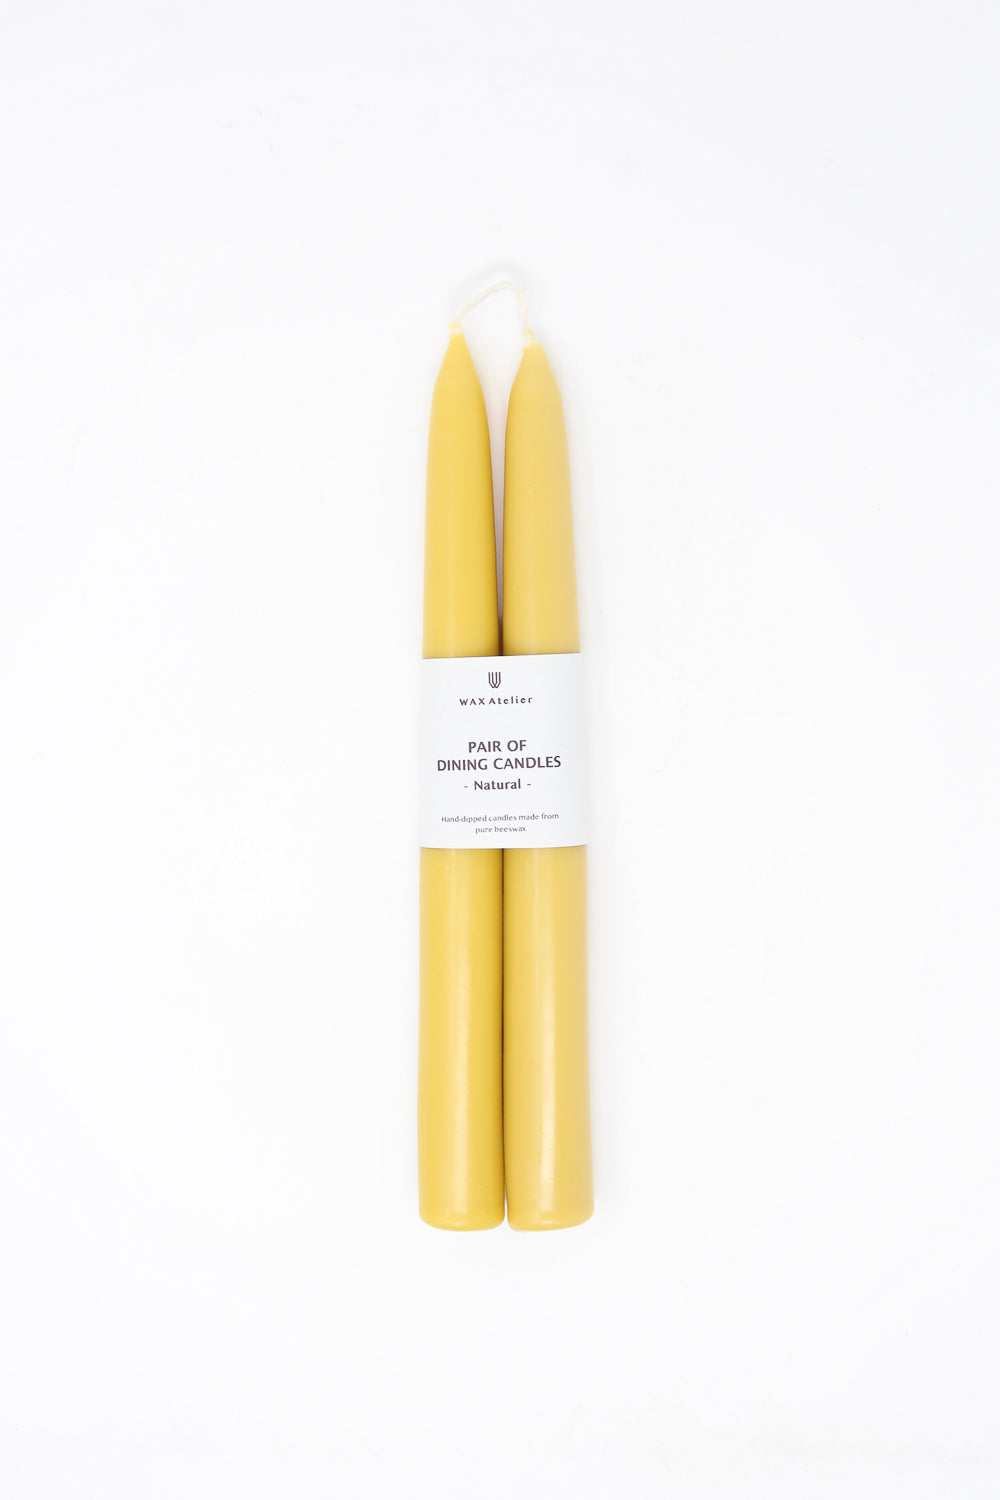 A pair of yellow Wax Atelier Beeswax Dining Candles in Natural against a white background.